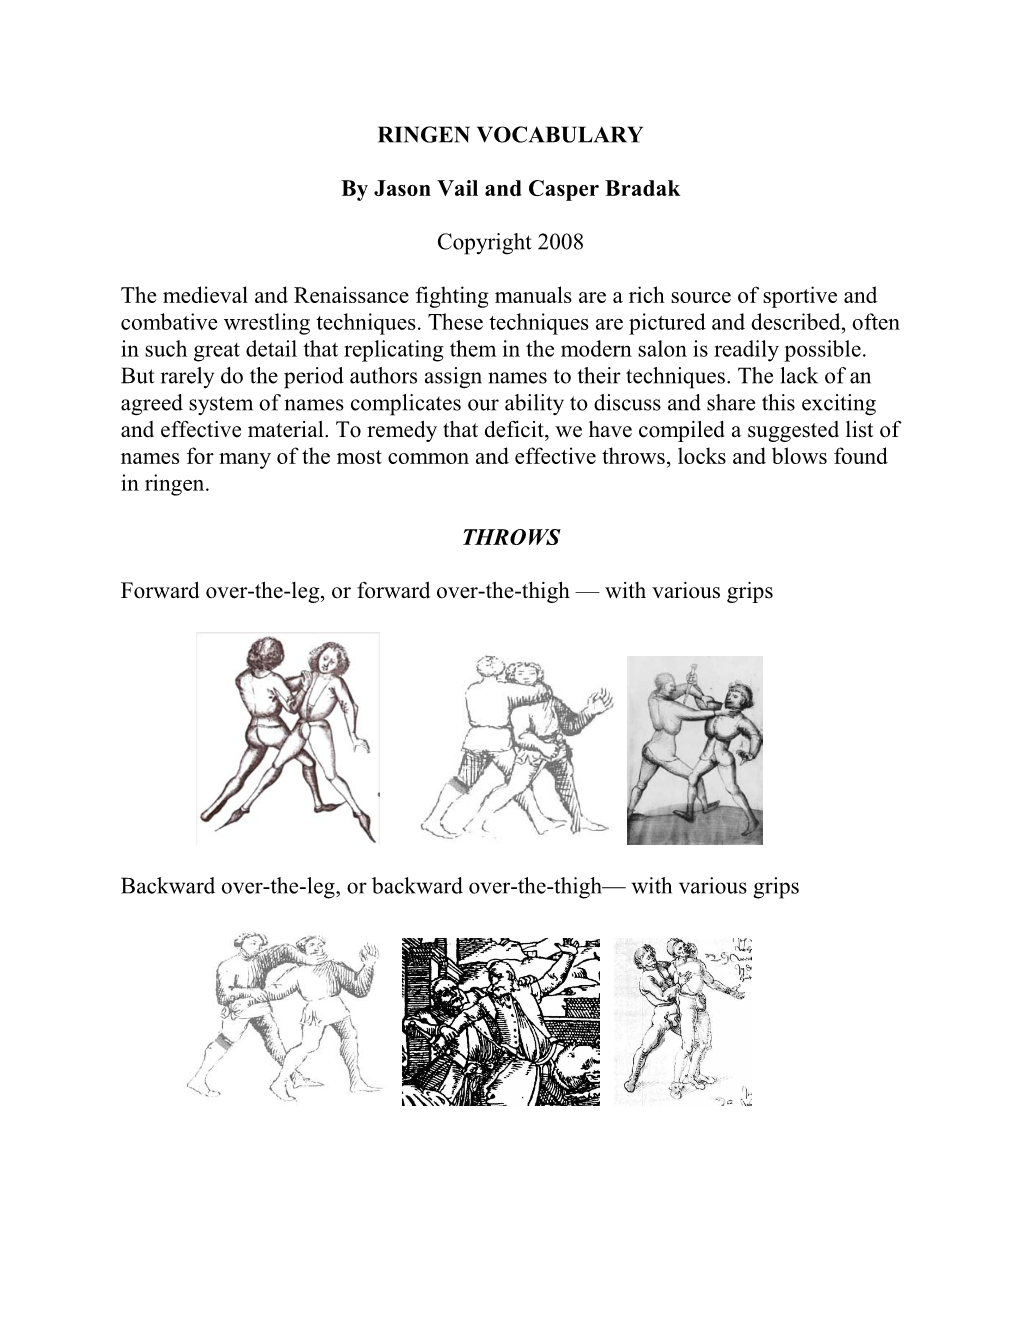 RINGEN VOCABULARY by Jason Vail and Casper Bradak Copyright 2008 the Medieval and Renaissance Fighting Manuals Are a Rich Source